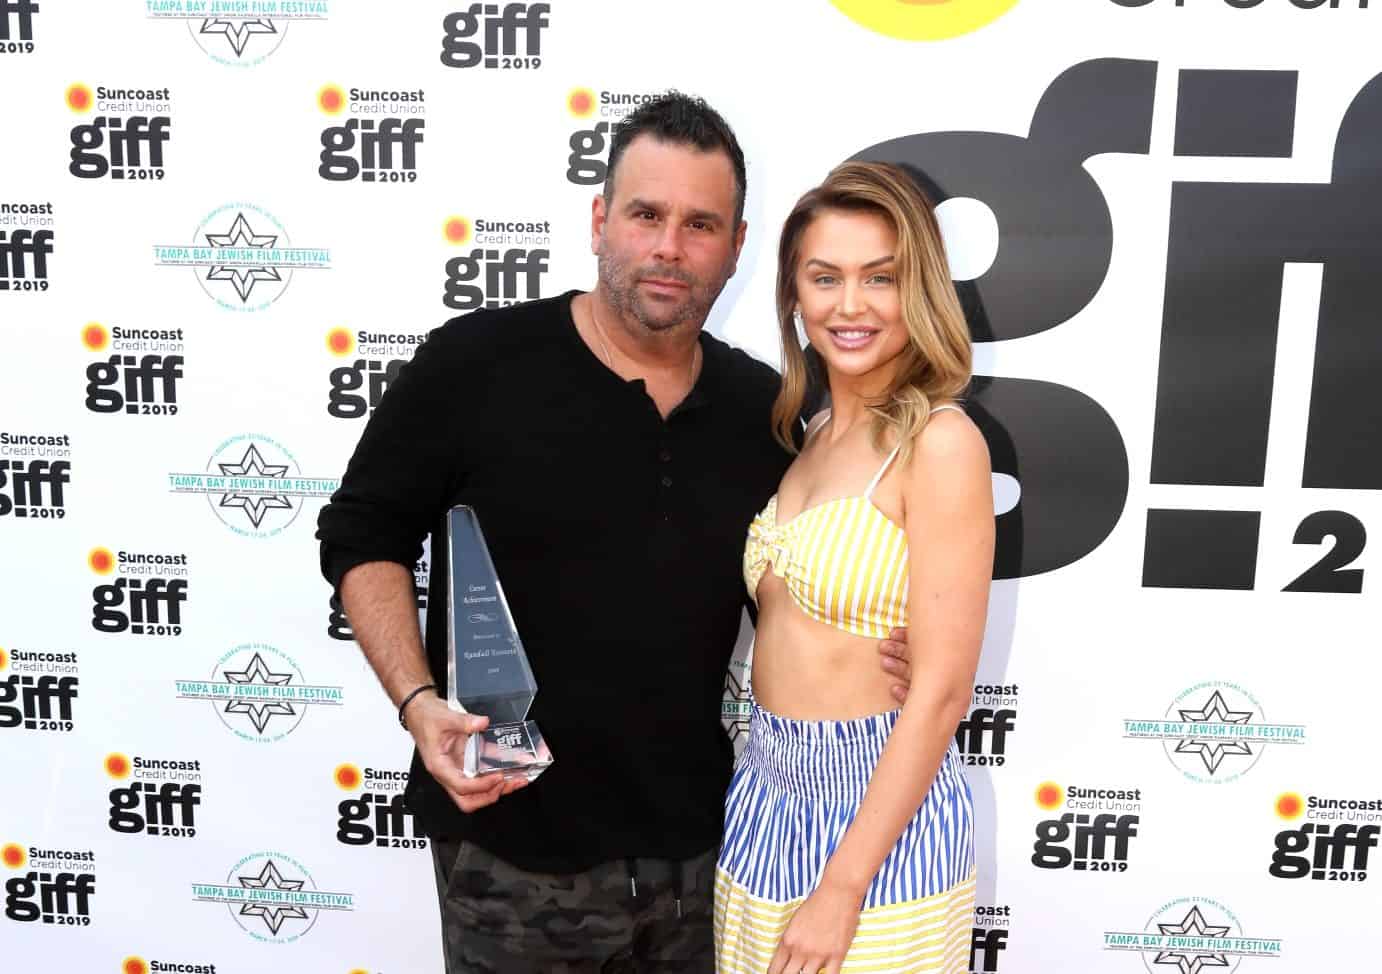 Vanderpump Rules' Randall Emmett Confirms He's Taking a "Step Back" From Podcast to Focus on His Kids, Vows to Remain "Private" After Lala Kent Split